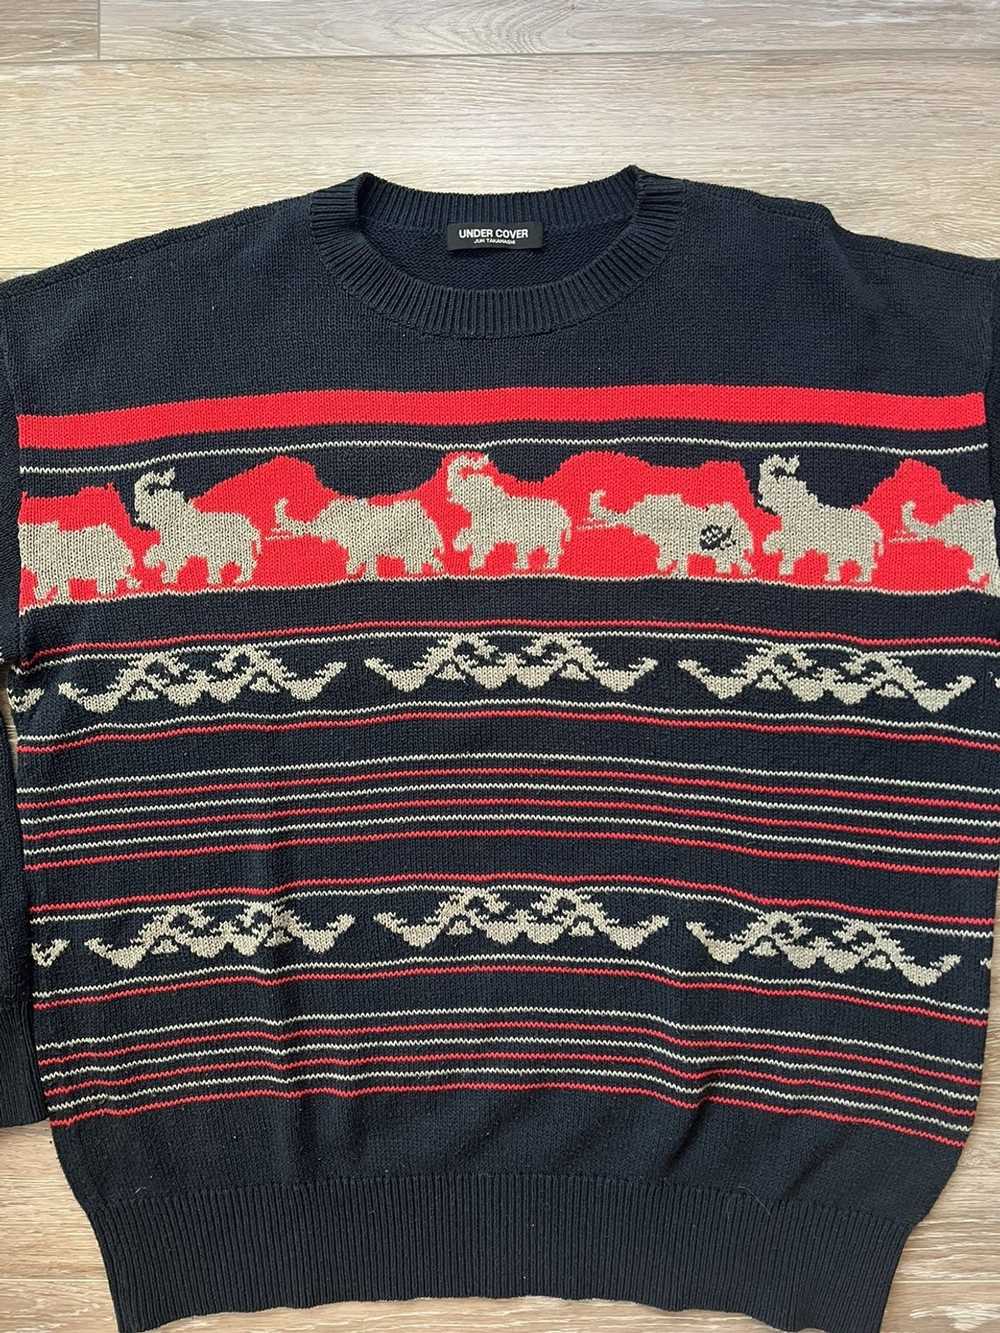 Undercover 1997 Elephant Knitted Sweater - image 2